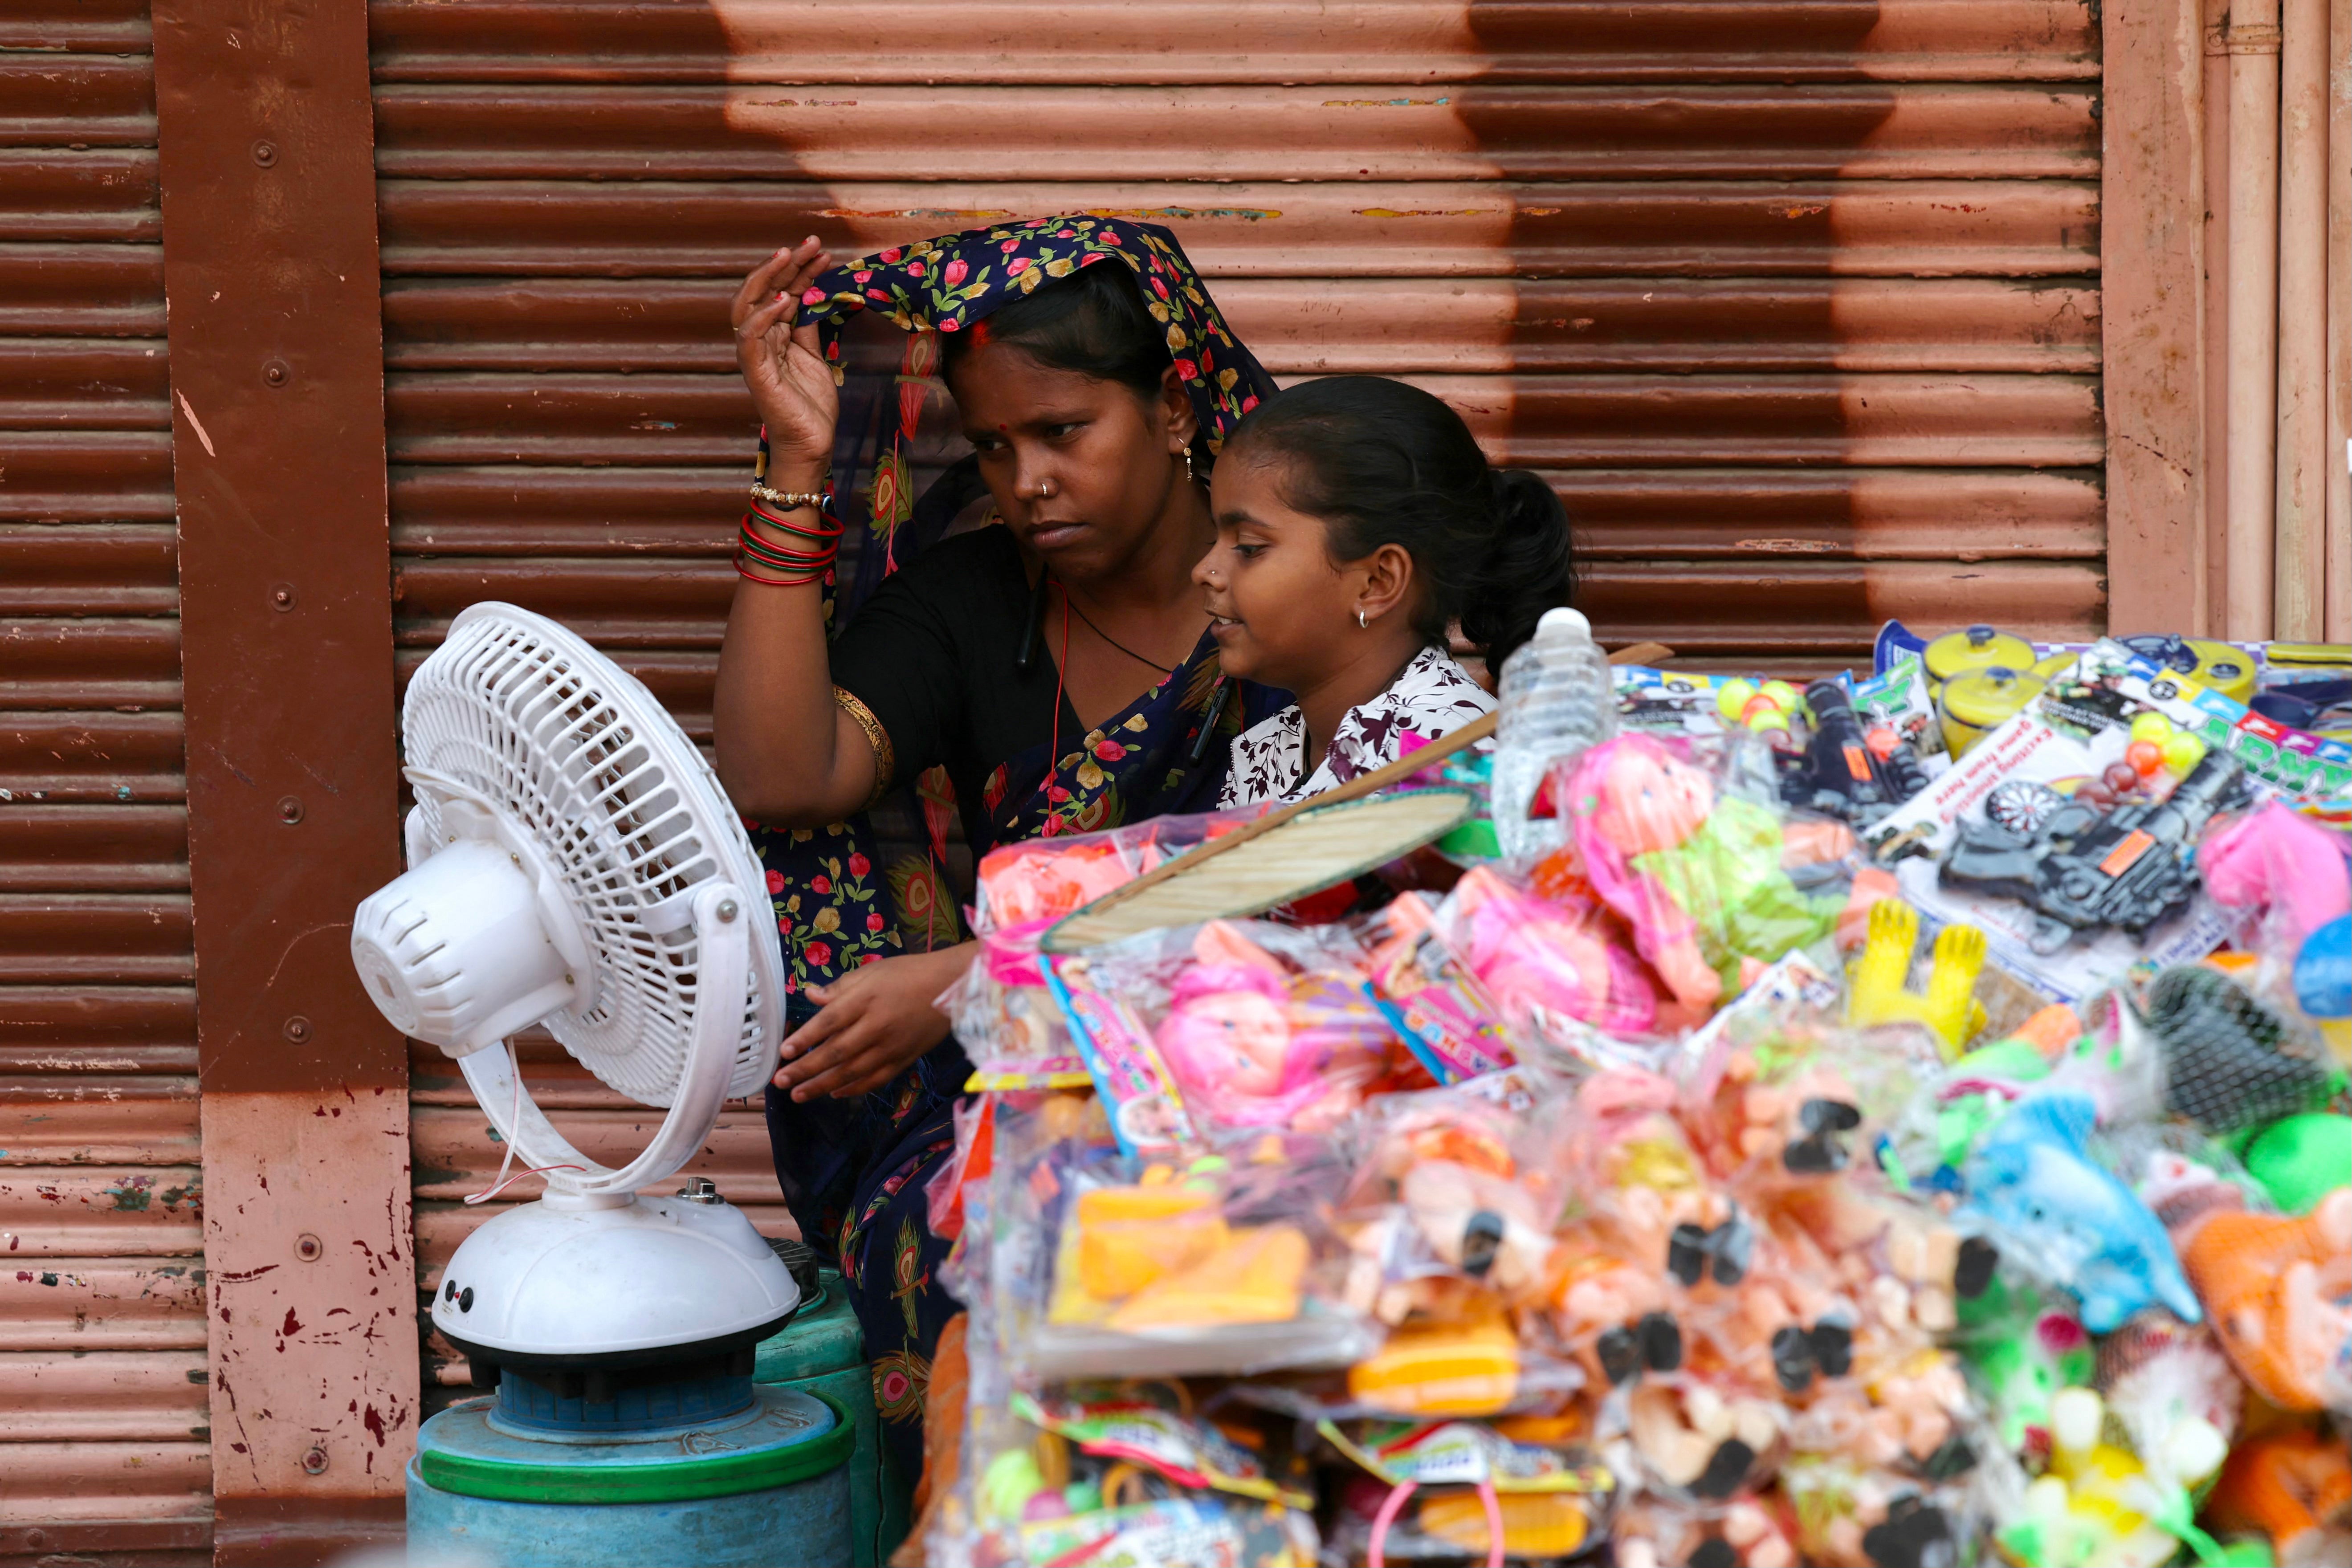 People sit in front of a table fan to cool off on a hot summer afternoon in Varanasi